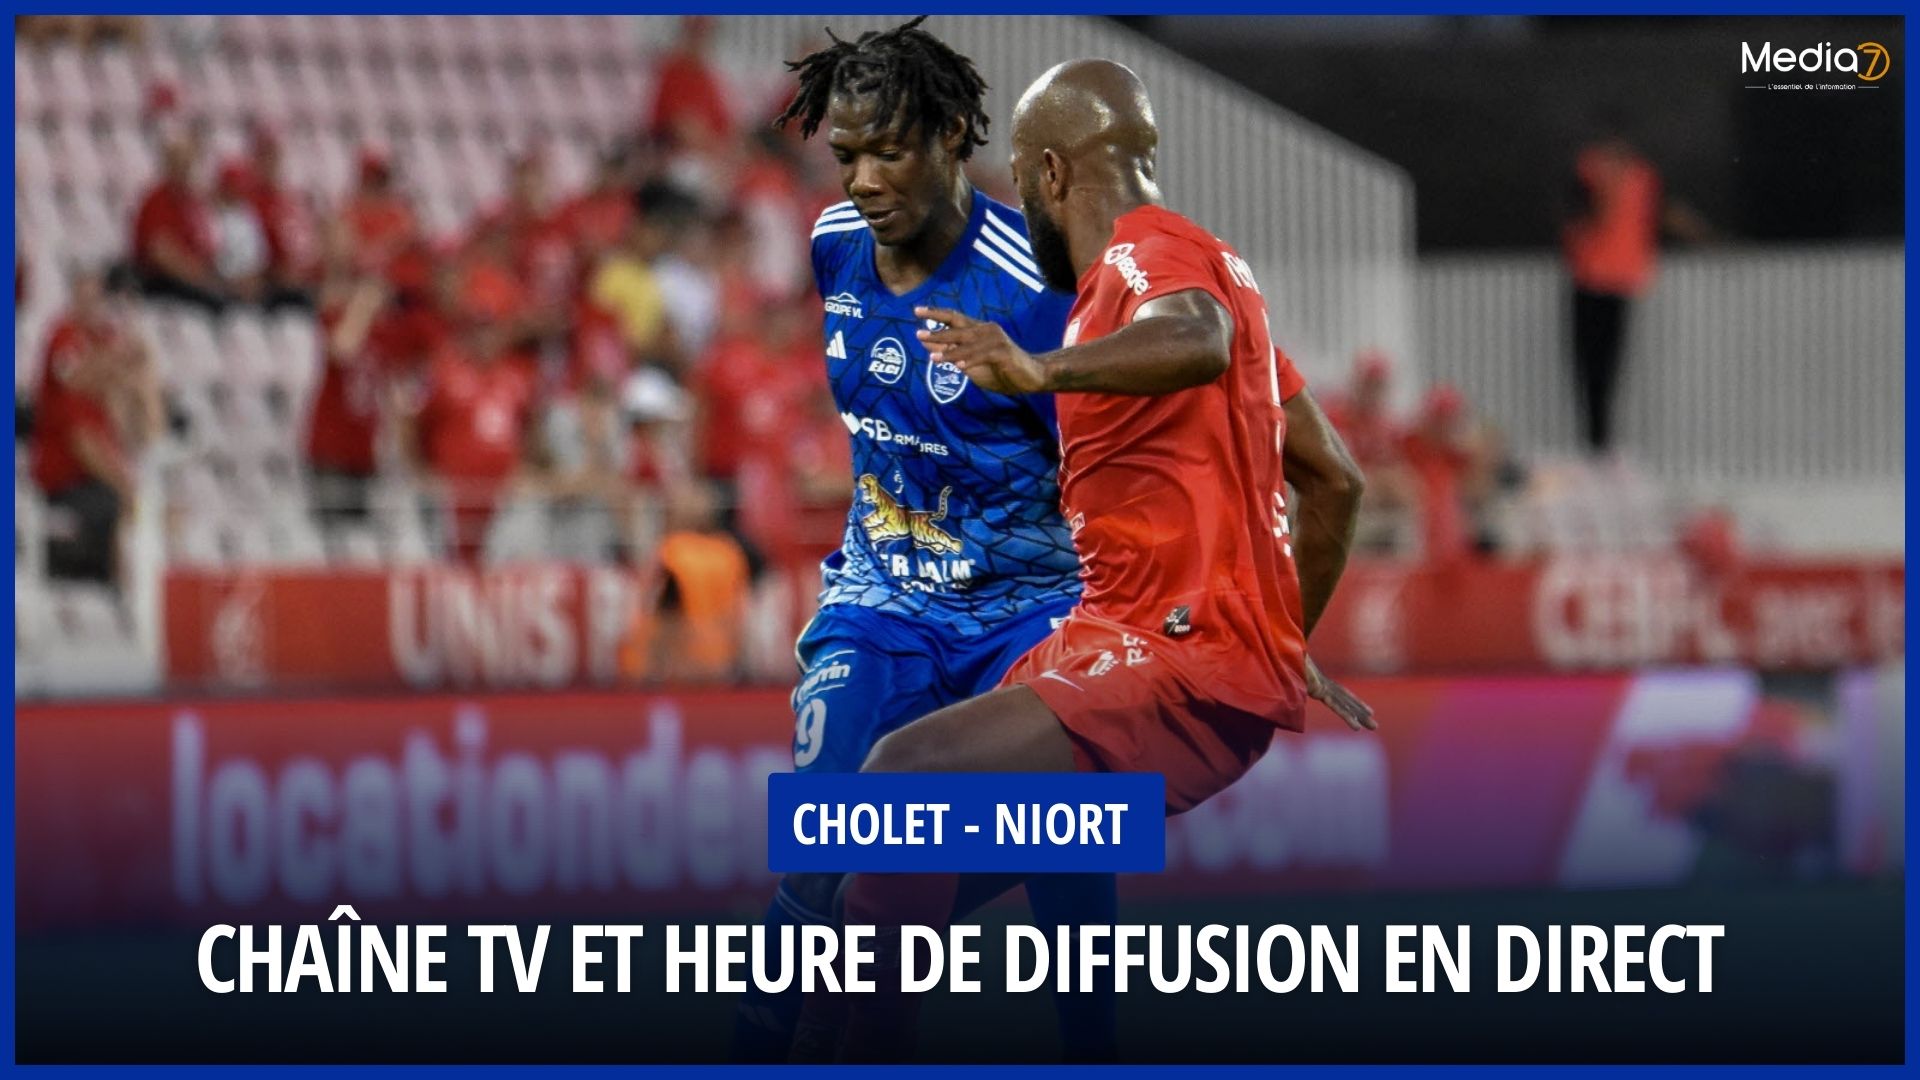 Match Villefranche - Dijon Live: TV Channel and Broadcast Schedule - Media7